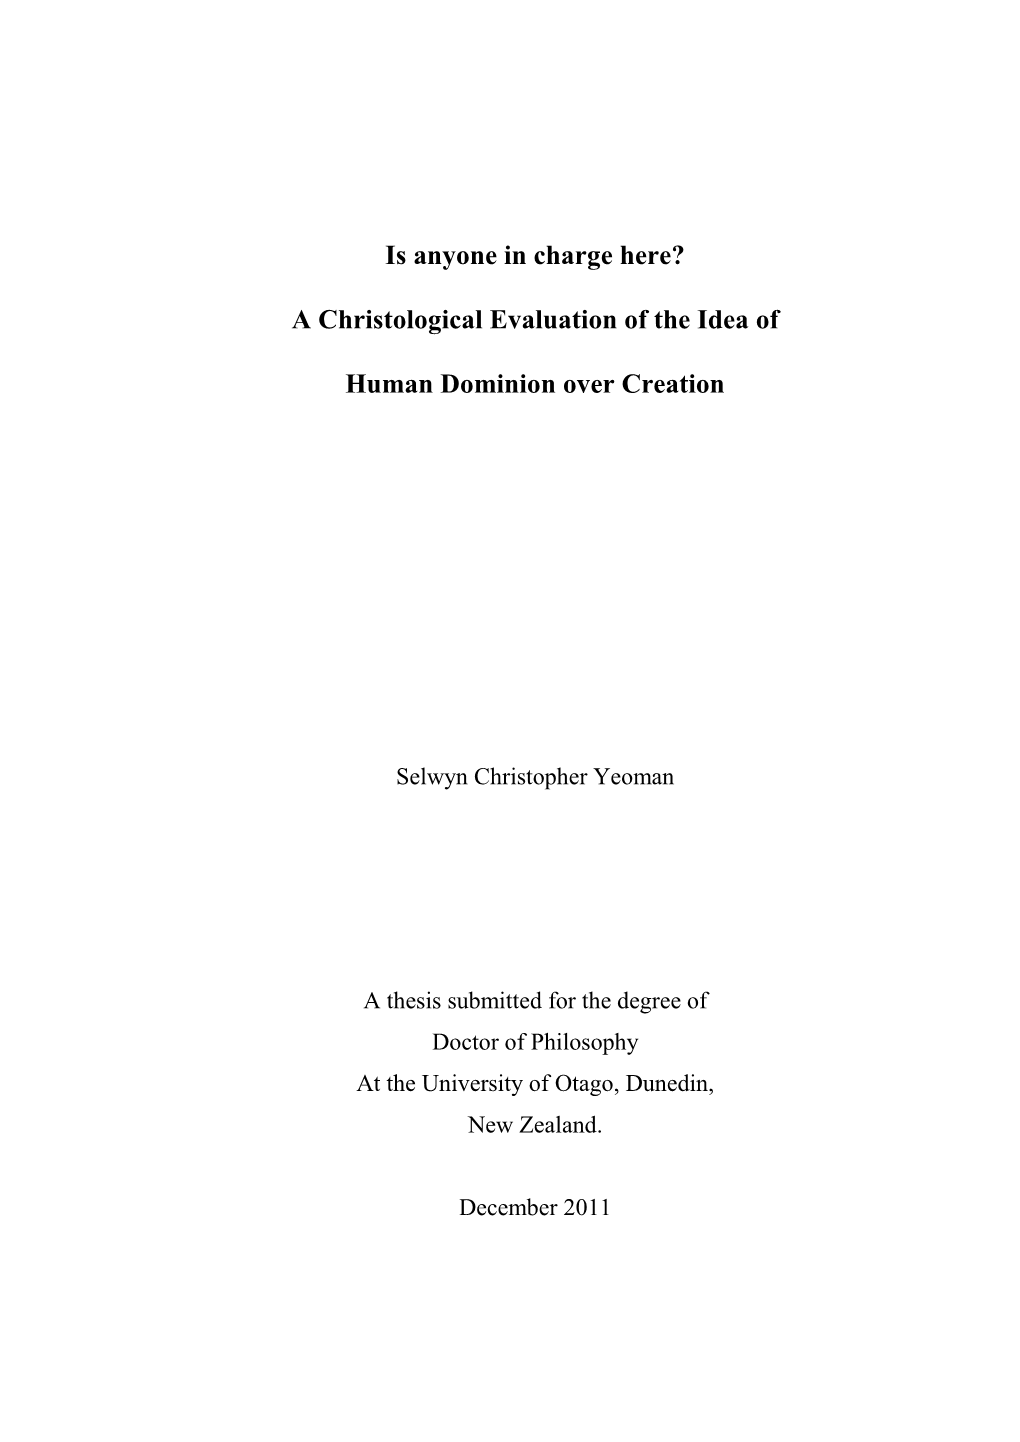 A Christological Evaluation of the Idea of Human Dominion Over Creation